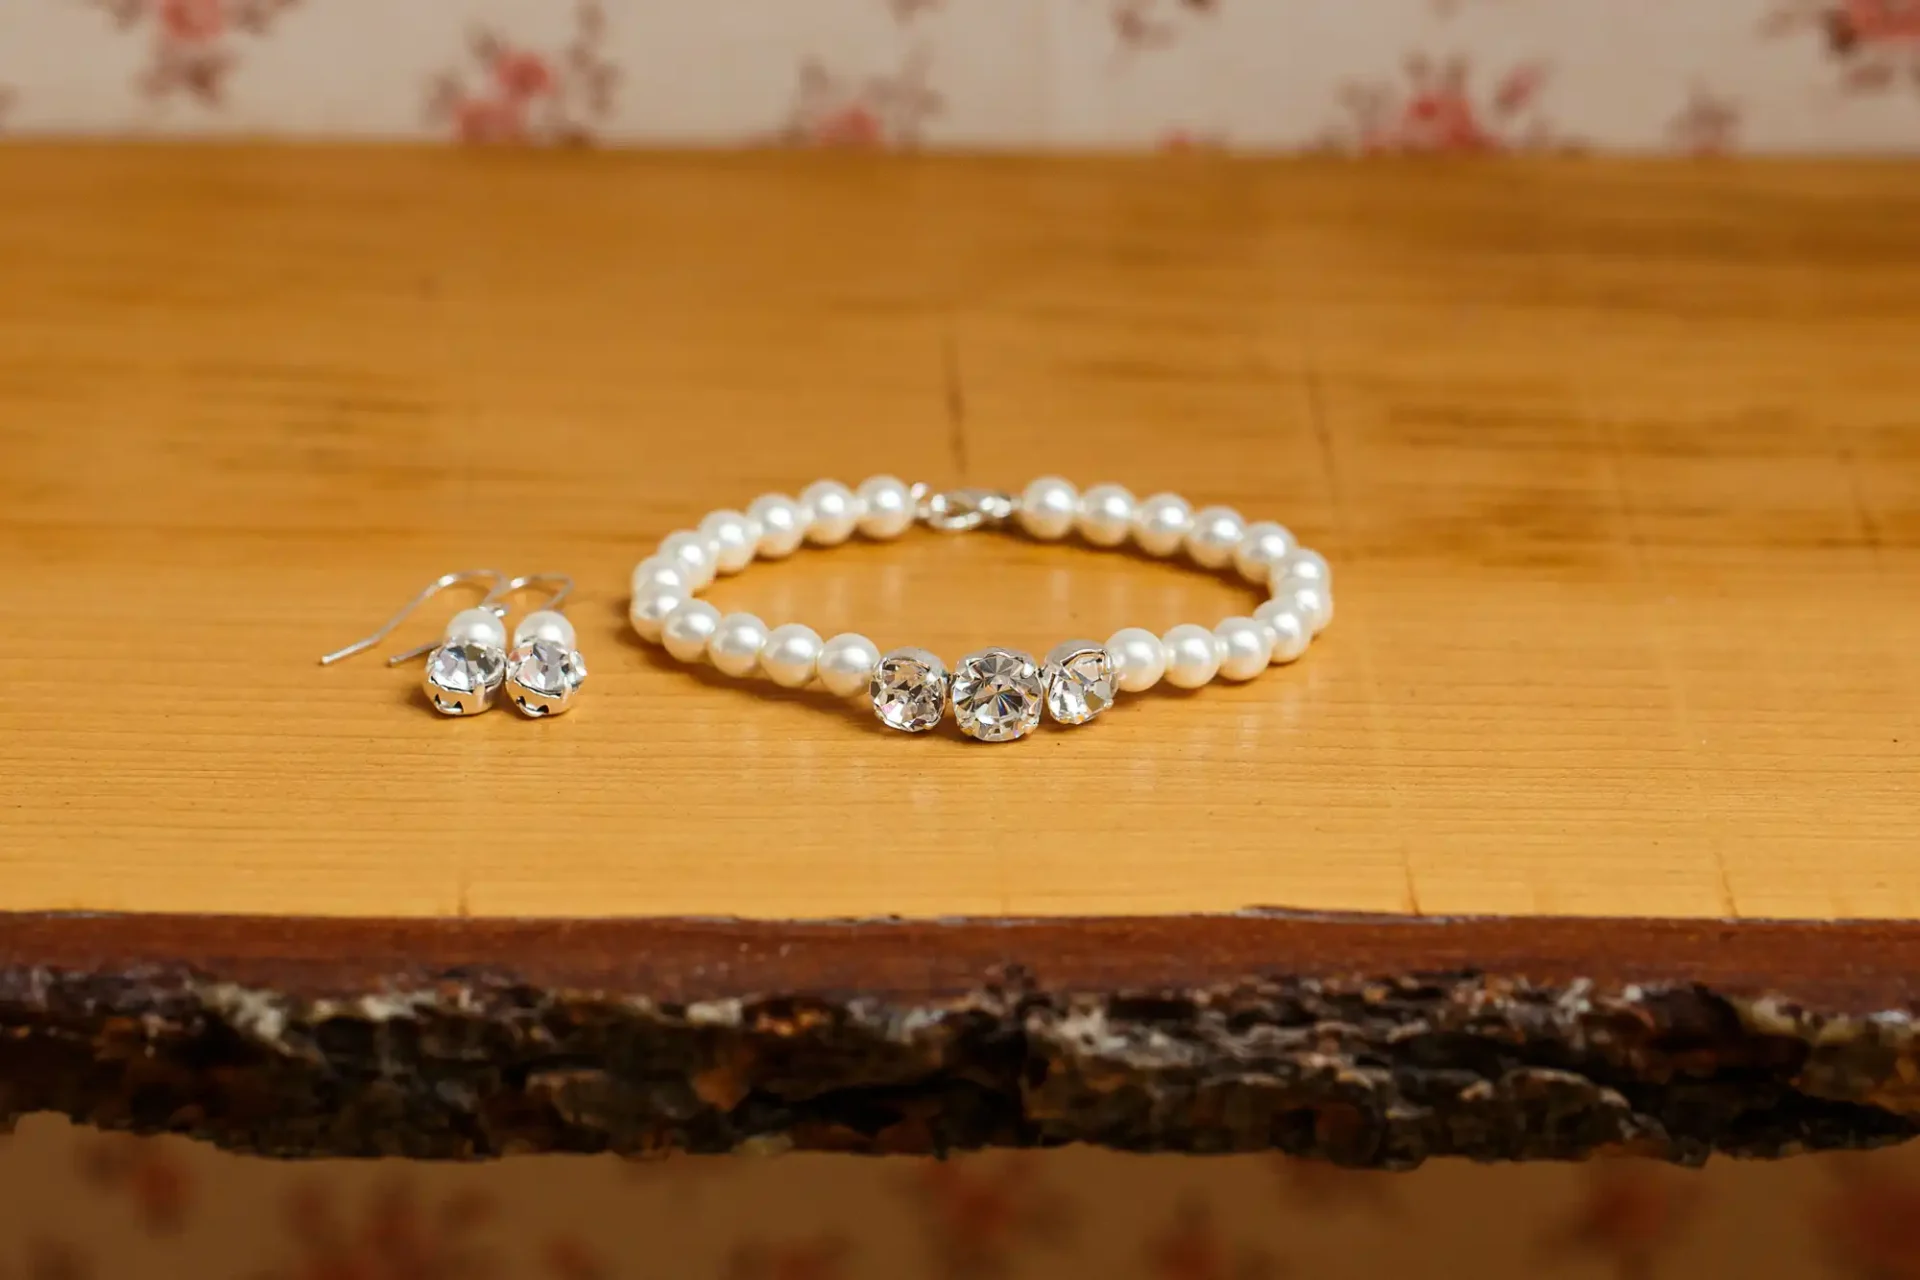 Pearl bracelet and crystal earrings set on a wooden table with a rustic edge.